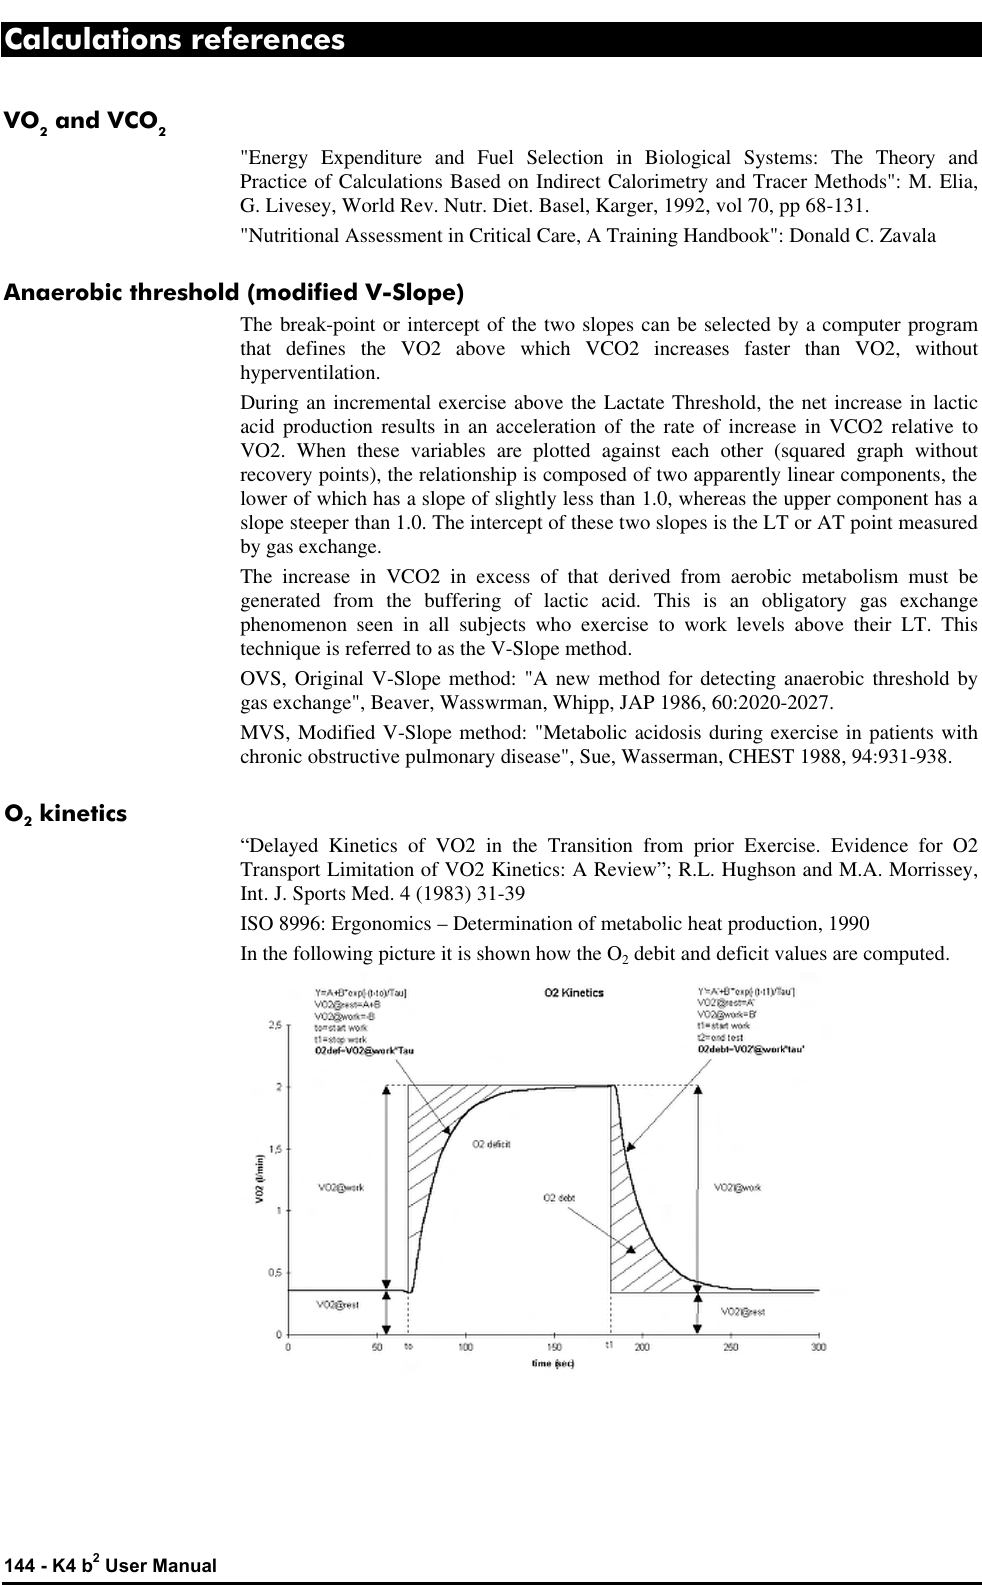  144 - K4 b2 User Manual Calculations references VO2 and VCO2 &quot;Energy Expenditure and Fuel Selection in Biological Systems: The Theory and Practice of Calculations Based on Indirect Calorimetry and Tracer Methods&quot;: M. Elia, G. Livesey, World Rev. Nutr. Diet. Basel, Karger, 1992, vol 70, pp 68-131. &quot;Nutritional Assessment in Critical Care, A Training Handbook&quot;: Donald C. Zavala Anaerobic threshold (modified V-Slope) The break-point or intercept of the two slopes can be selected by a computer program that defines the VO2 above which VCO2 increases faster than VO2, without hyperventilation. During an incremental exercise above the Lactate Threshold, the net increase in lactic acid production results in an acceleration of the rate of increase in VCO2 relative to VO2. When these variables are plotted against each other (squared graph without recovery points), the relationship is composed of two apparently linear components, the lower of which has a slope of slightly less than 1.0, whereas the upper component has a slope steeper than 1.0. The intercept of these two slopes is the LT or AT point measured by gas exchange. The increase in VCO2 in excess of that derived from aerobic metabolism must be generated from the buffering of lactic acid. This is an obligatory gas exchange phenomenon seen in all subjects who exercise to work levels above their LT. This technique is referred to as the V-Slope method. OVS, Original V-Slope method: &quot;A new method for detecting anaerobic threshold by gas exchange&quot;, Beaver, Wasswrman, Whipp, JAP 1986, 60:2020-2027. MVS, Modified V-Slope method: &quot;Metabolic acidosis during exercise in patients with chronic obstructive pulmonary disease&quot;, Sue, Wasserman, CHEST 1988, 94:931-938. O2 kinetics “Delayed Kinetics of VO2 in the Transition from prior Exercise. Evidence for O2 Transport Limitation of VO2 Kinetics: A Review”; R.L. Hughson and M.A. Morrissey, Int. J. Sports Med. 4 (1983) 31-39 ISO 8996: Ergonomics – Determination of metabolic heat production, 1990 In the following picture it is shown how the O2 debit and deficit values are computed.  